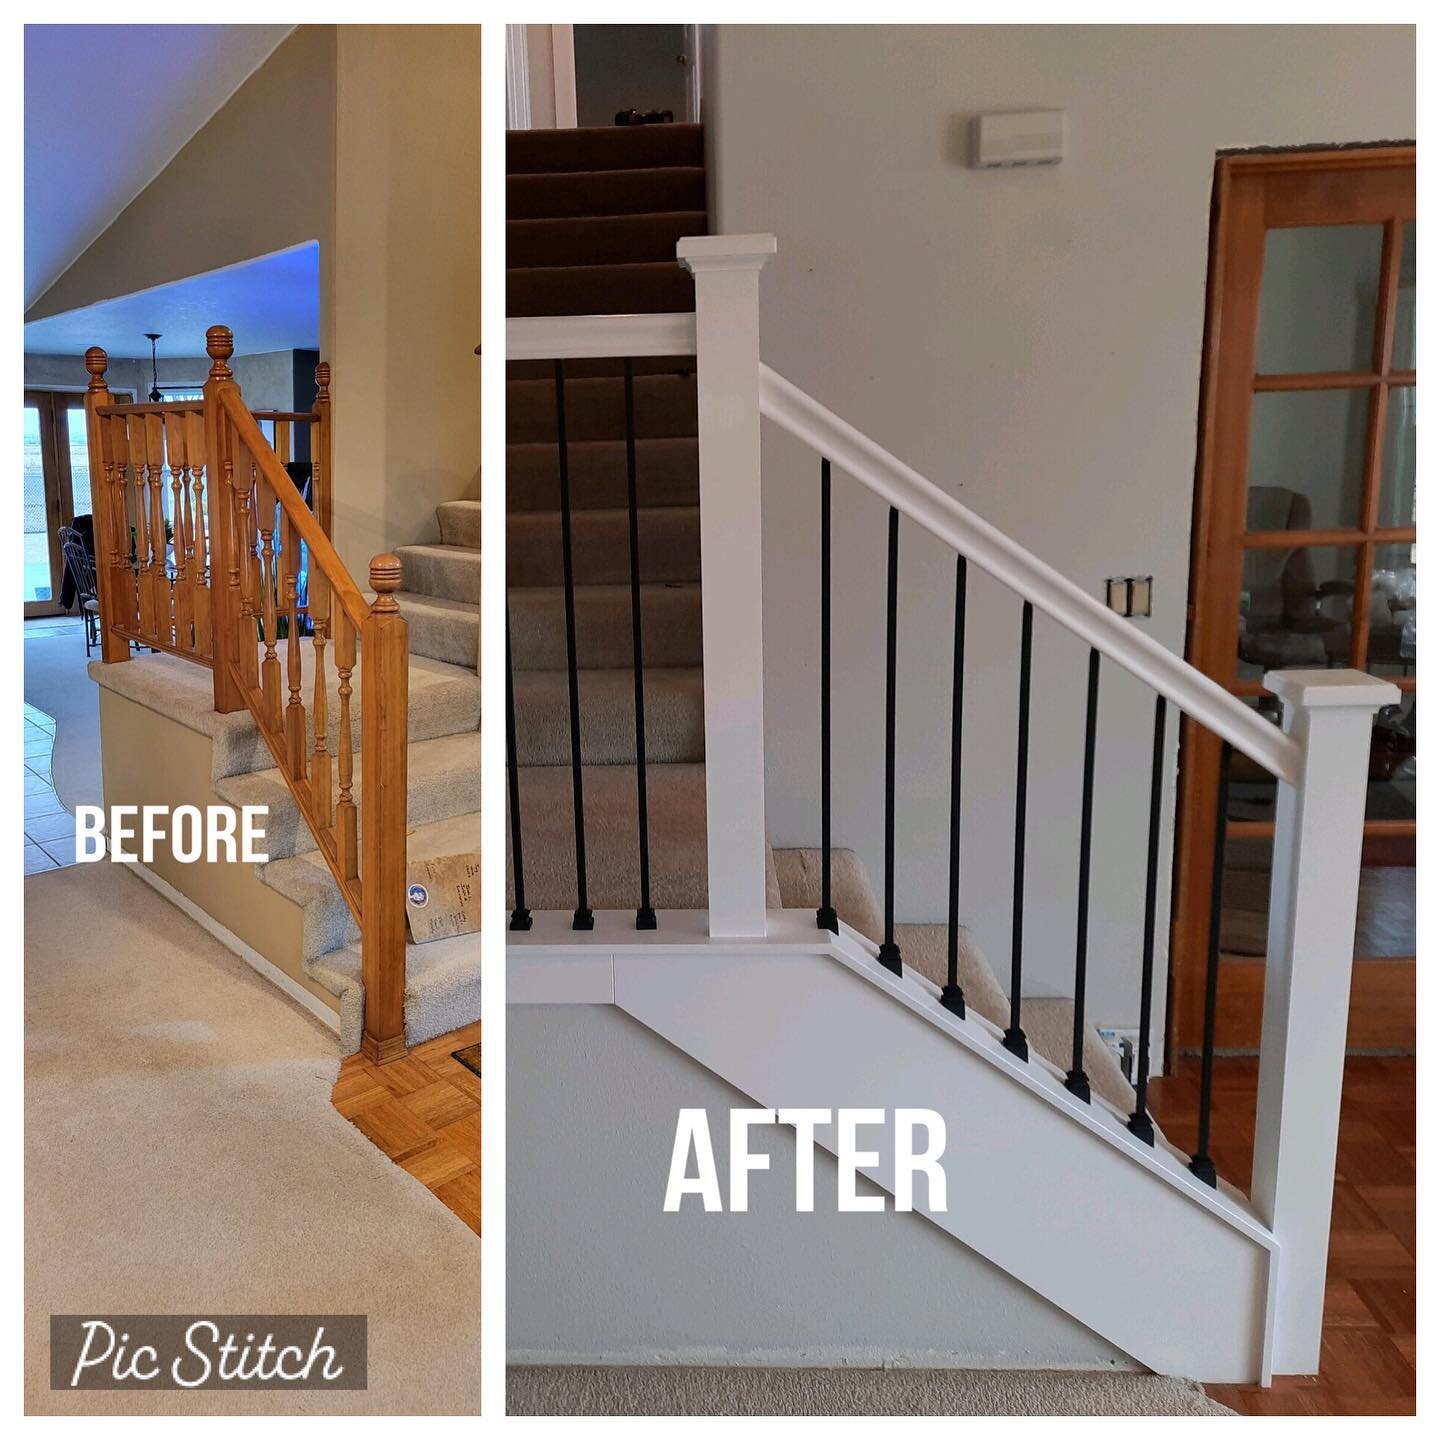 BEFORE ➡️ AFTER

Take a look at this project. Added a nice painted wall cap, skirtboards, and changed out replaced the railing with updated newel posts and iron balusters. Pretty easy change to do inside your home, but provides an entirely different 